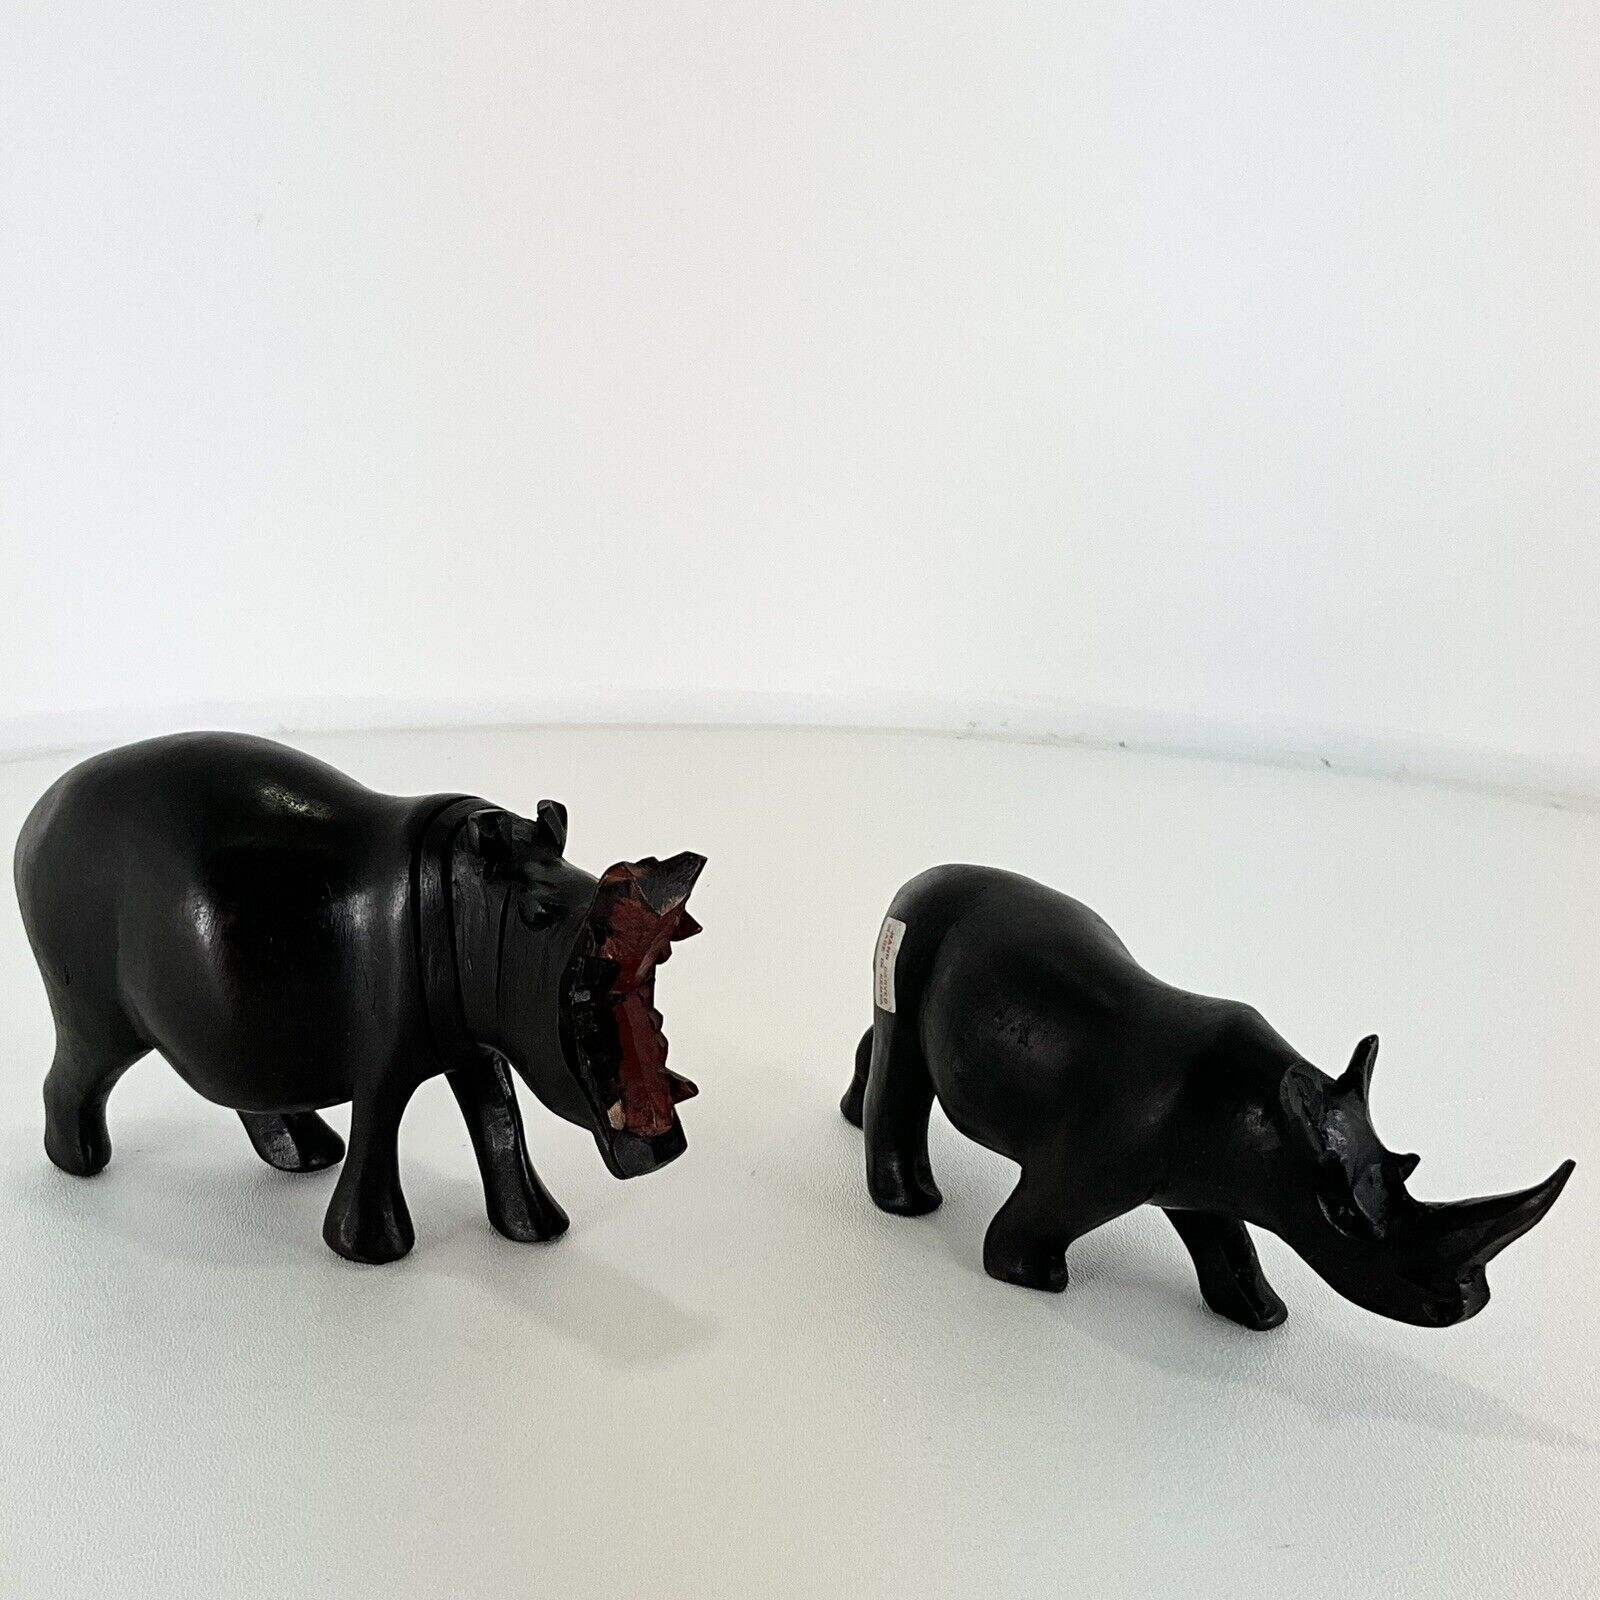 Vintage Hand Carved Wooden Warthog And Rhino Figurines Made In Kenya. Beautiful